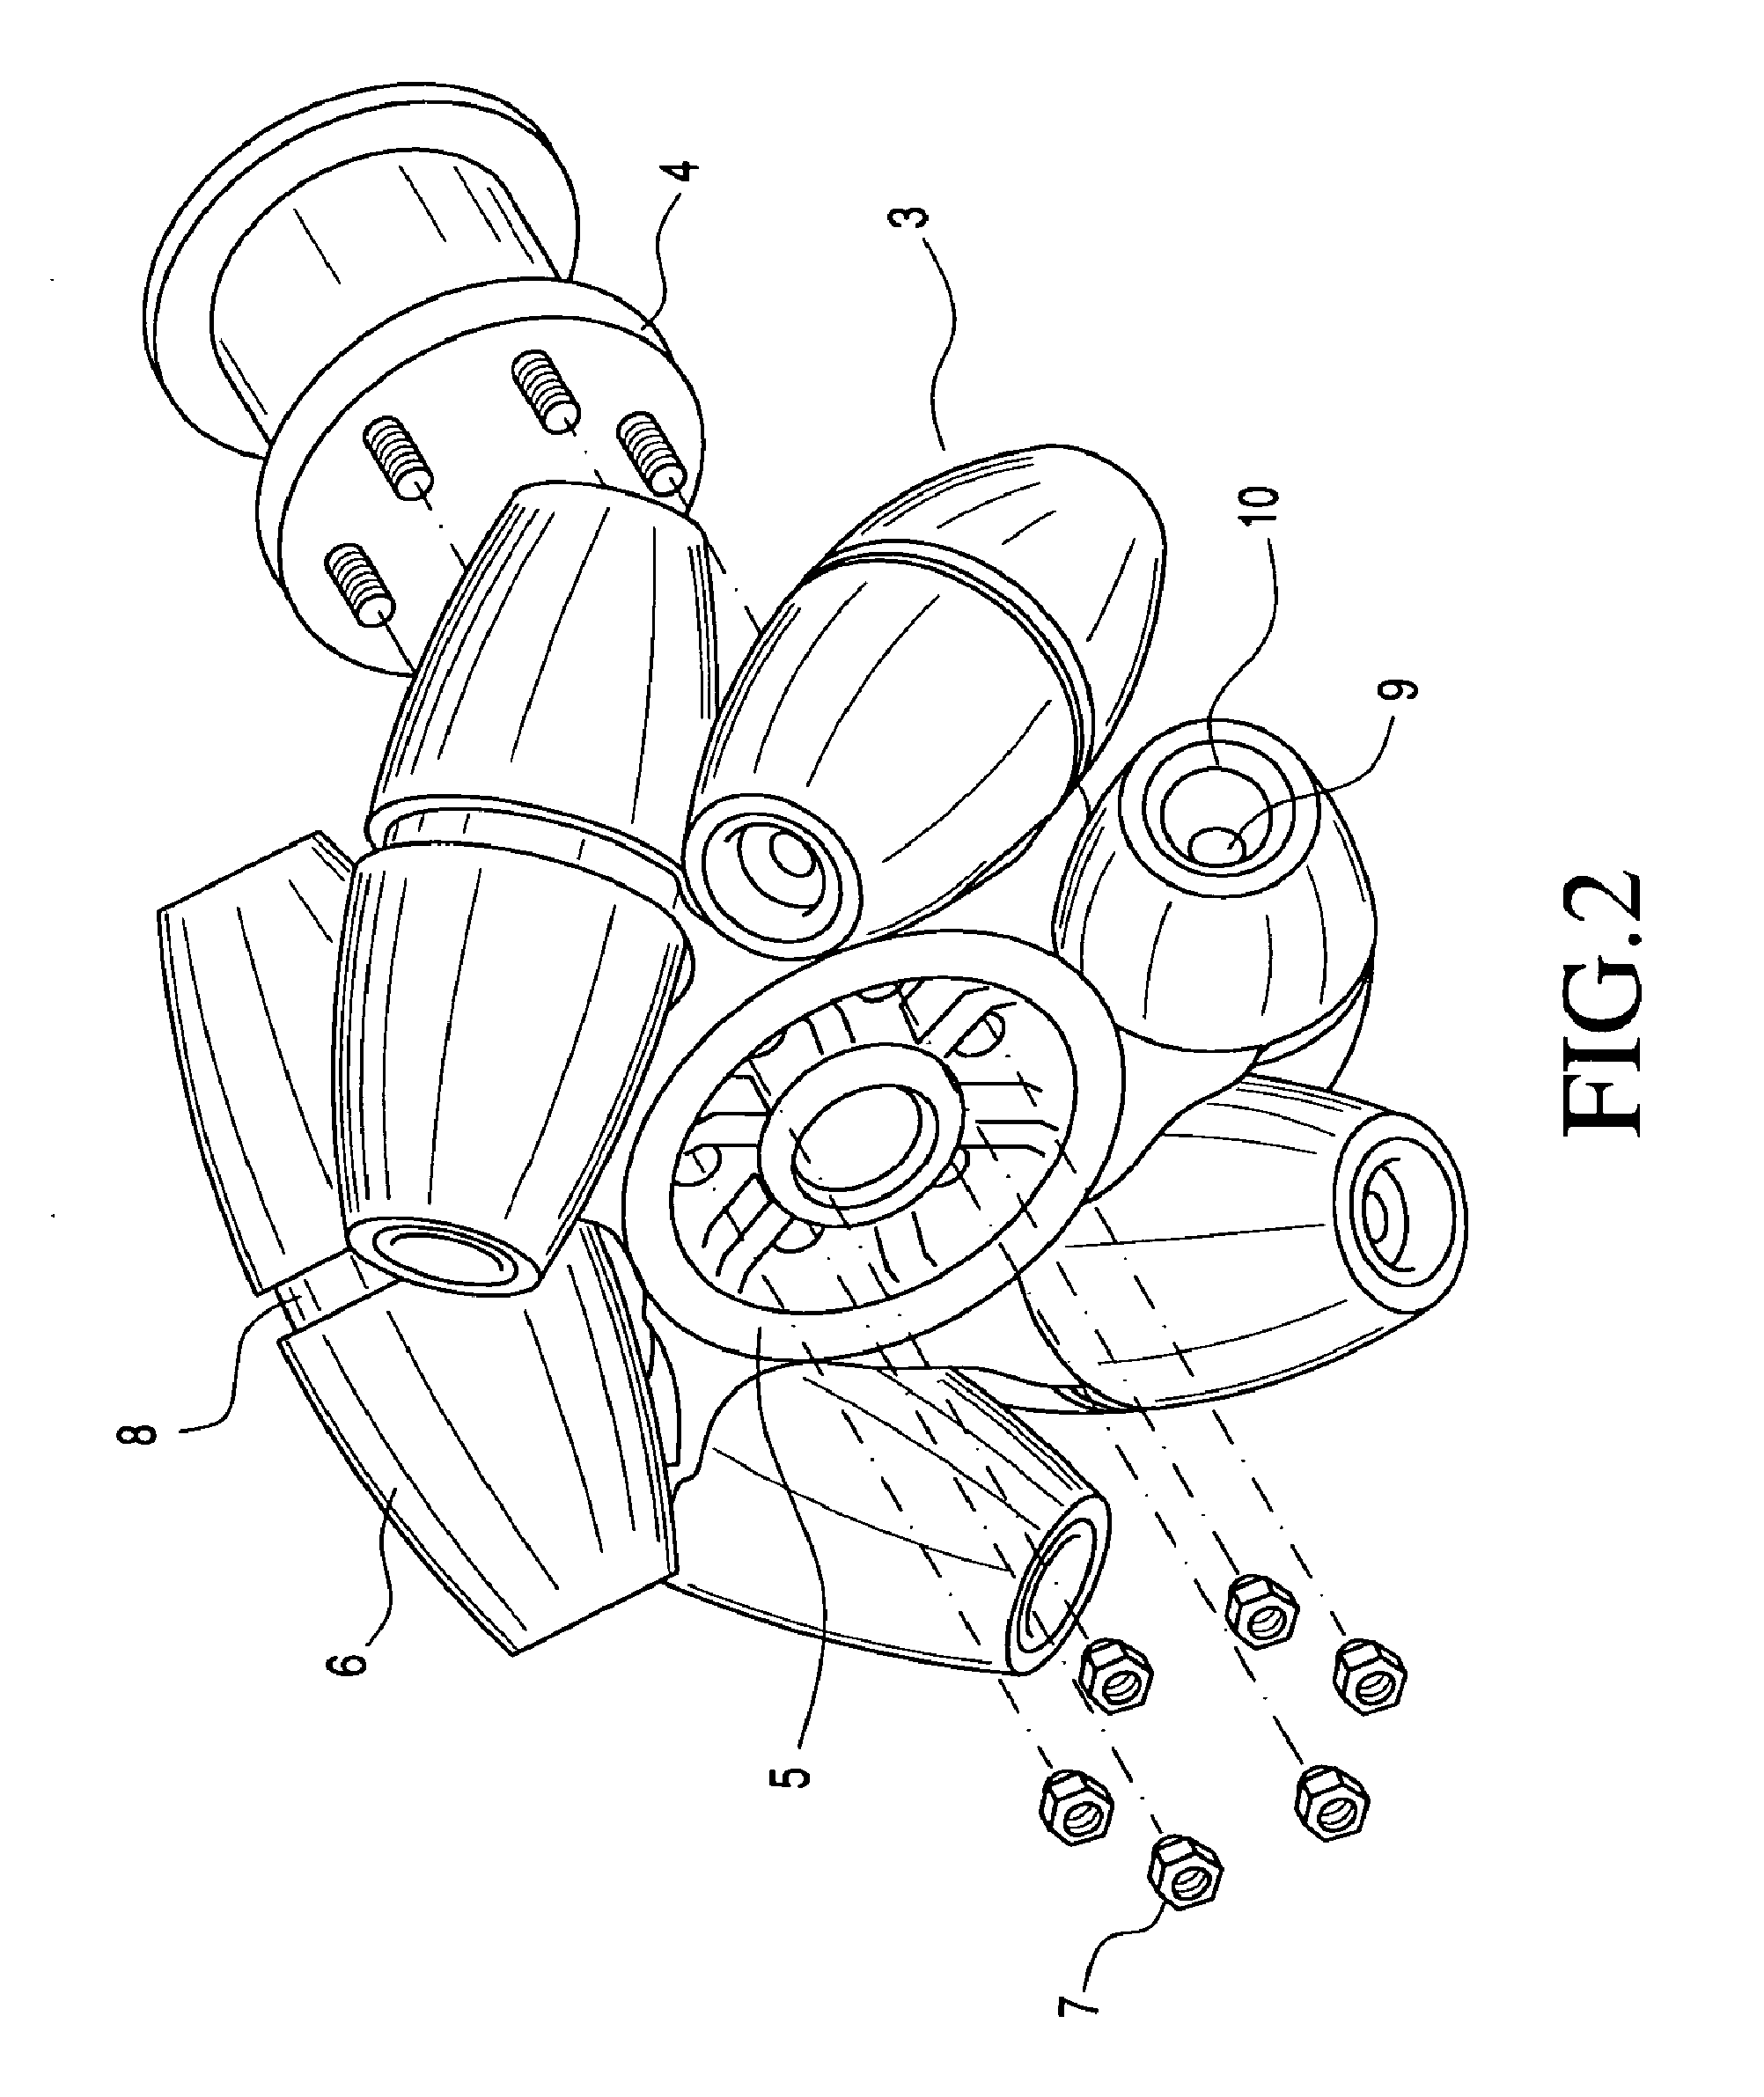 Omni-directional wheels and methods and vehicles employing same